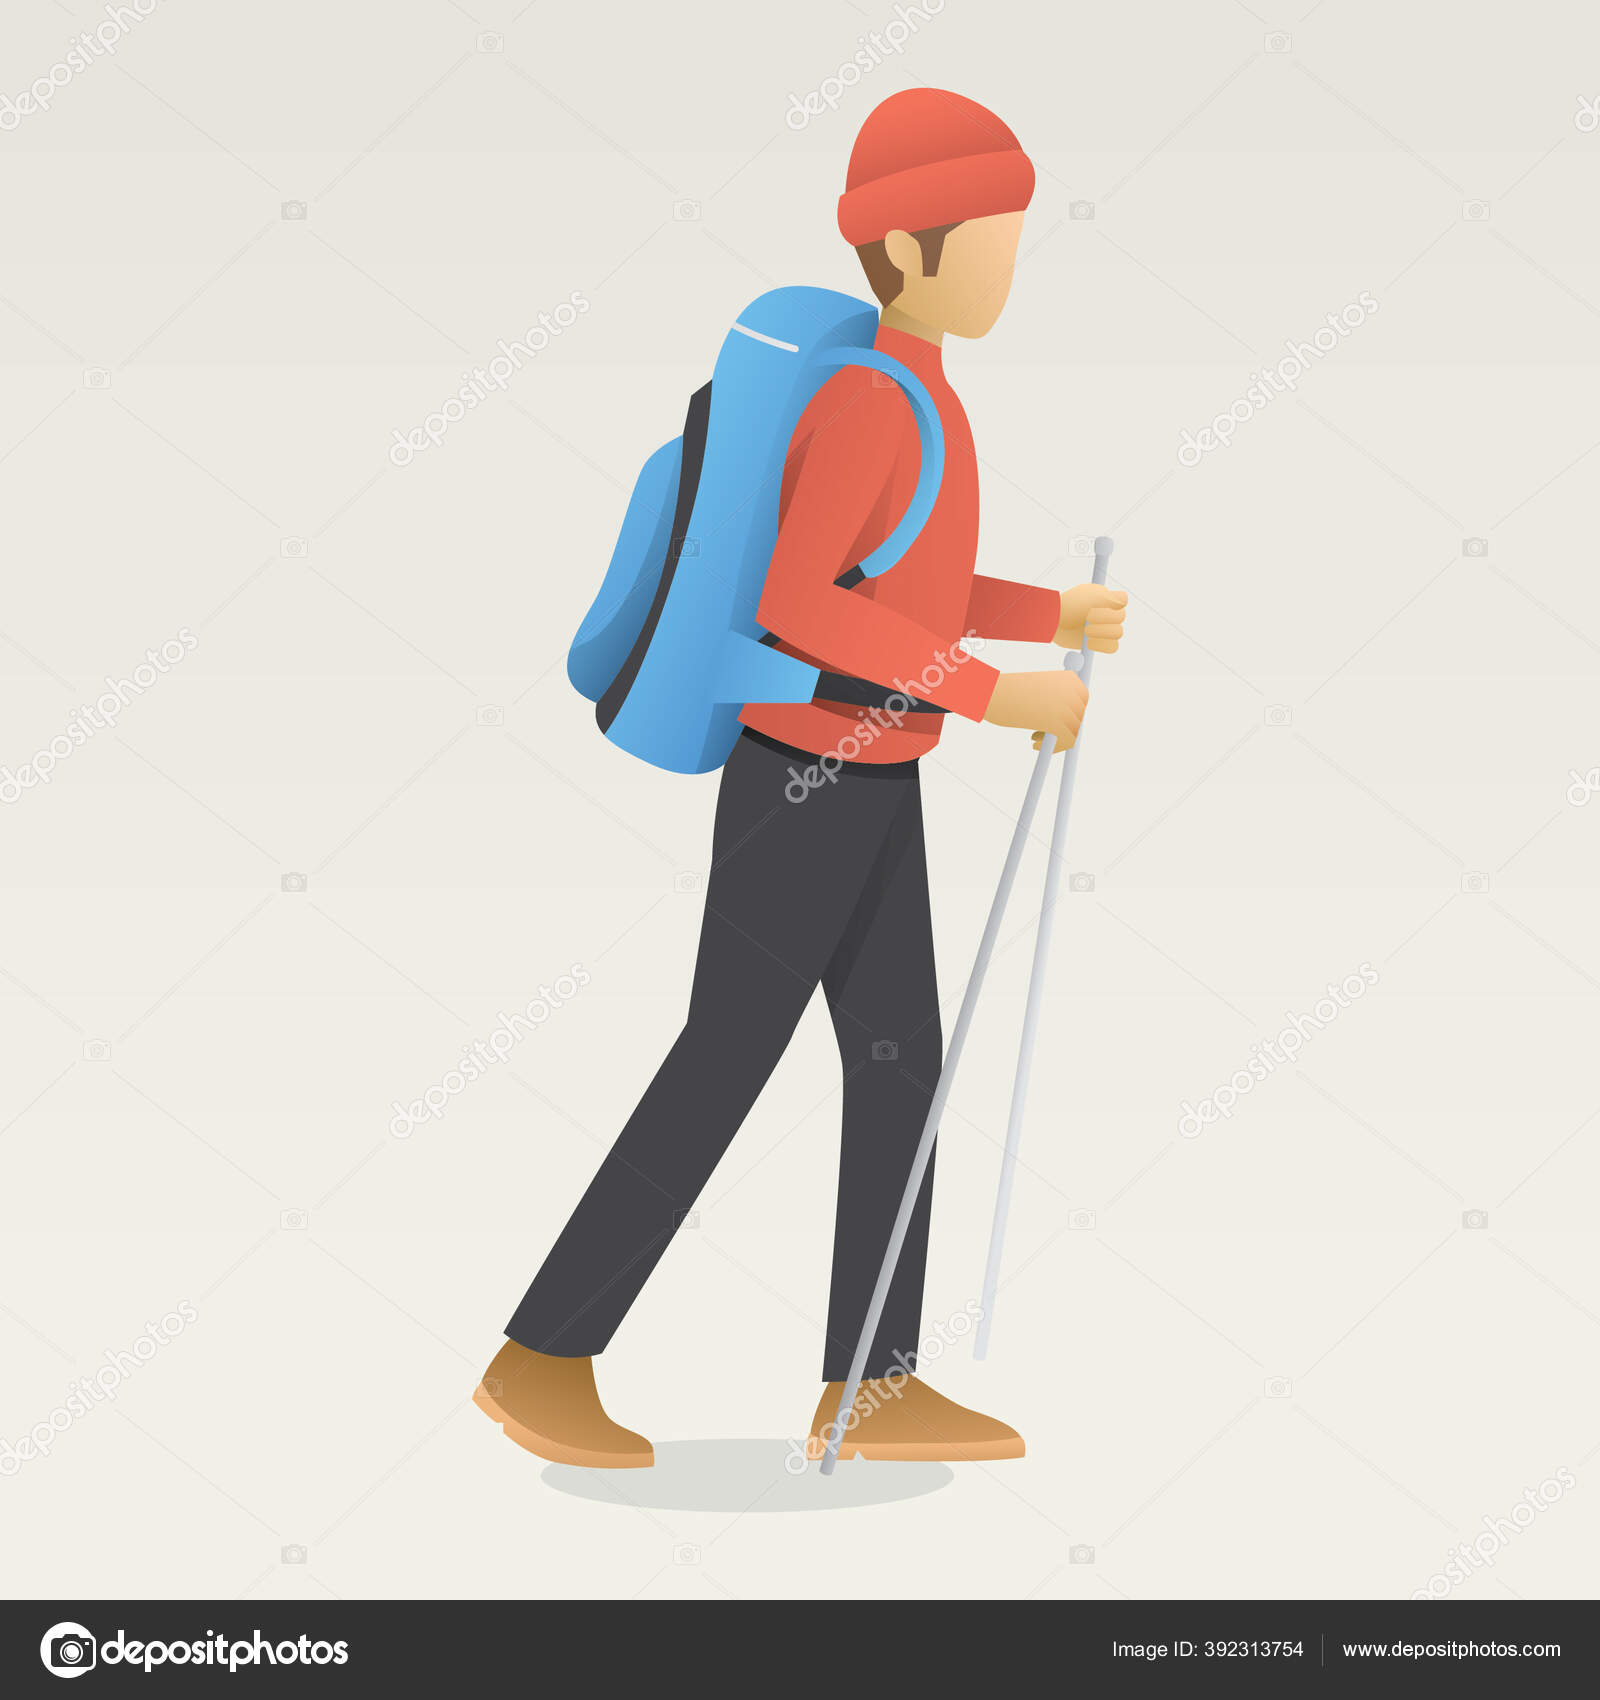 43,453 Man Hiking Clothes Images, Stock Photos, 3D objects, & Vectors